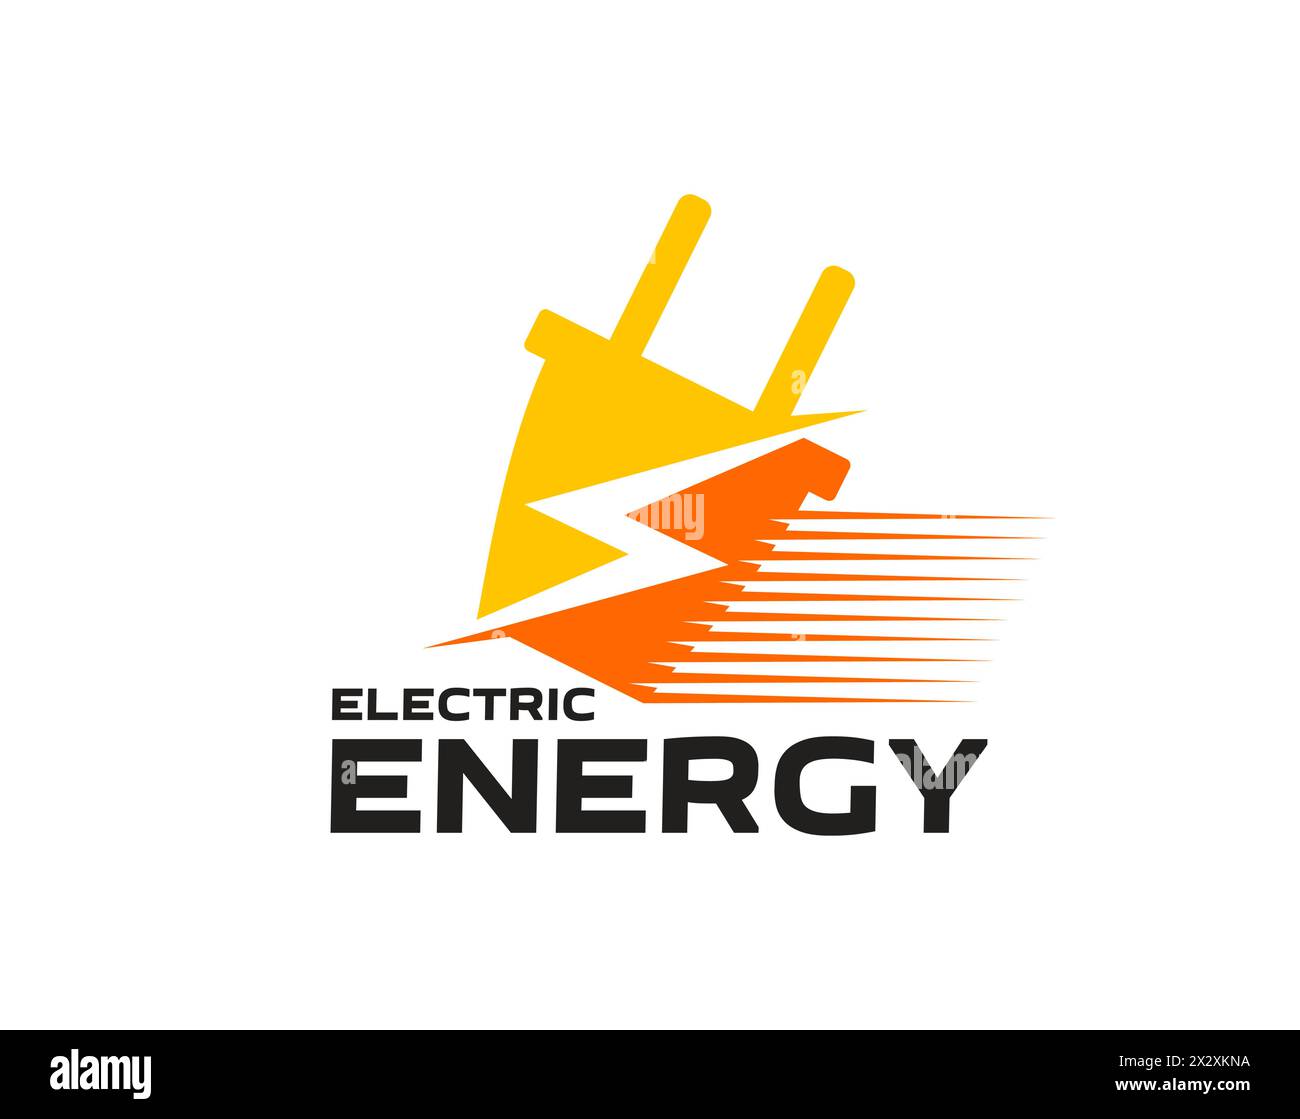 Electric energy icon featuring stylized plug merging into a dynamic lightning bolt, symbolizing power, efficiency and modern electrical solutions. Isolated vector emblem in red and orange colors Stock Vector